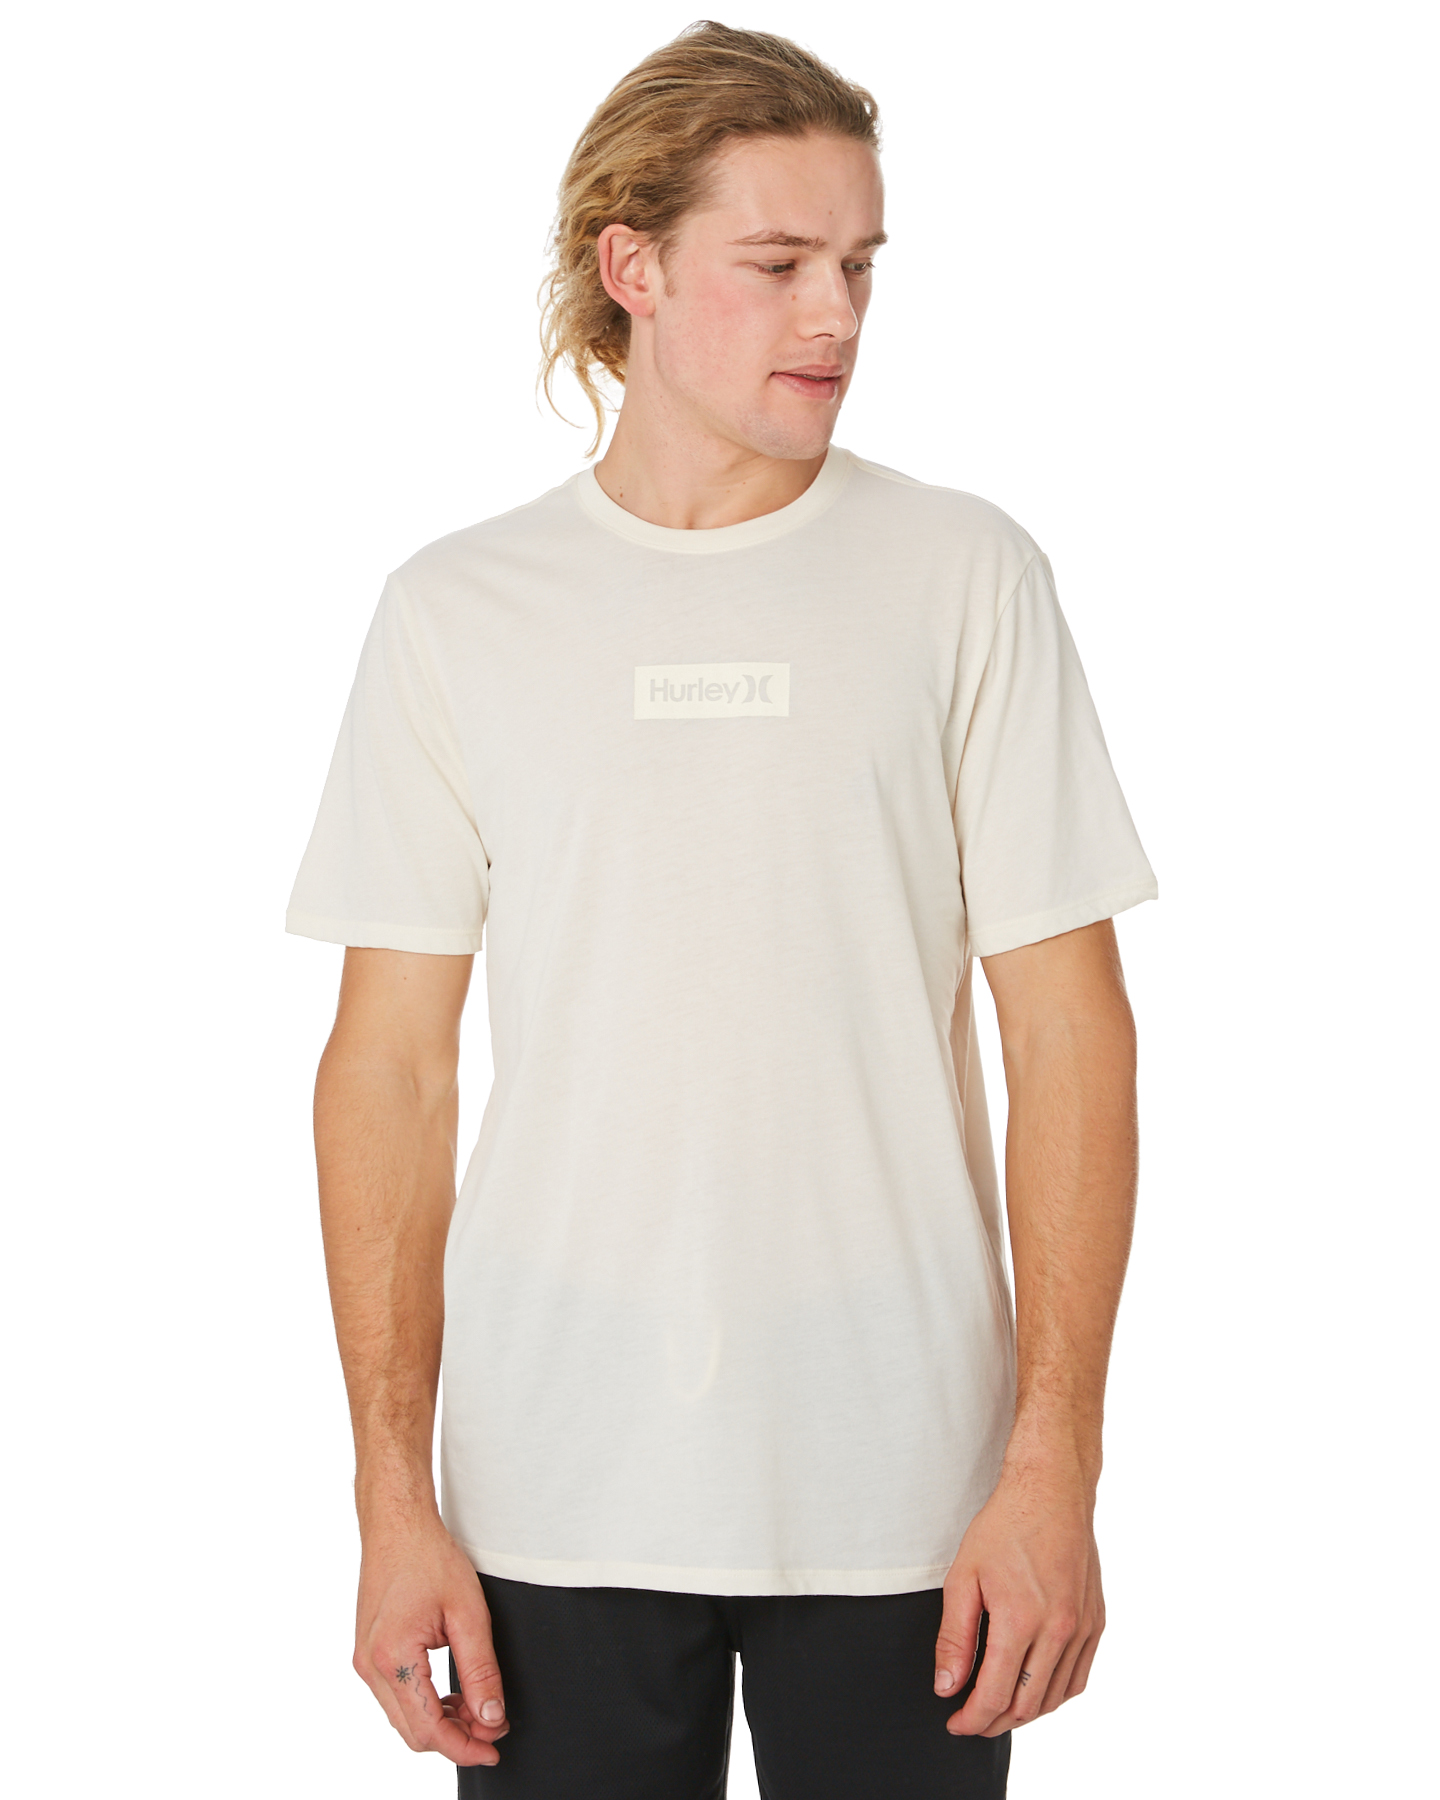 Hurley Dri-Fit O&O Small Box Mens Tee - Pale Ivory | SurfStitch